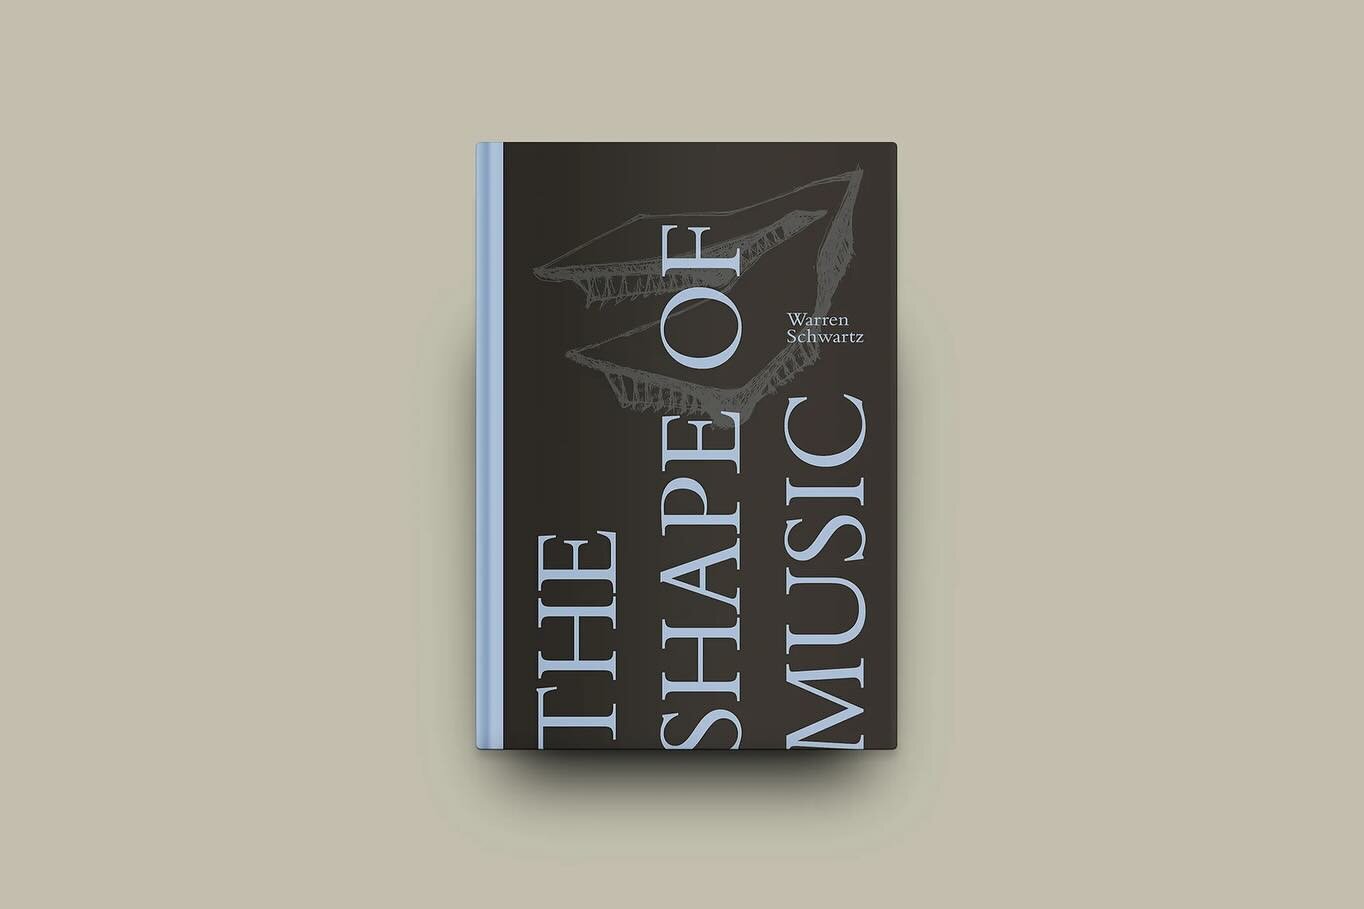 &ldquo;The Shape of Music,&rdquo; written and illustrated by Warren Schwartz, is being released today via Oscar Riera Ojeda Publishers. Foreword by Nicholas Urie. Introduction by Mark Volpe. Edited by Oscar Riera Ojeda. @buildingsonapage @oscarrierao